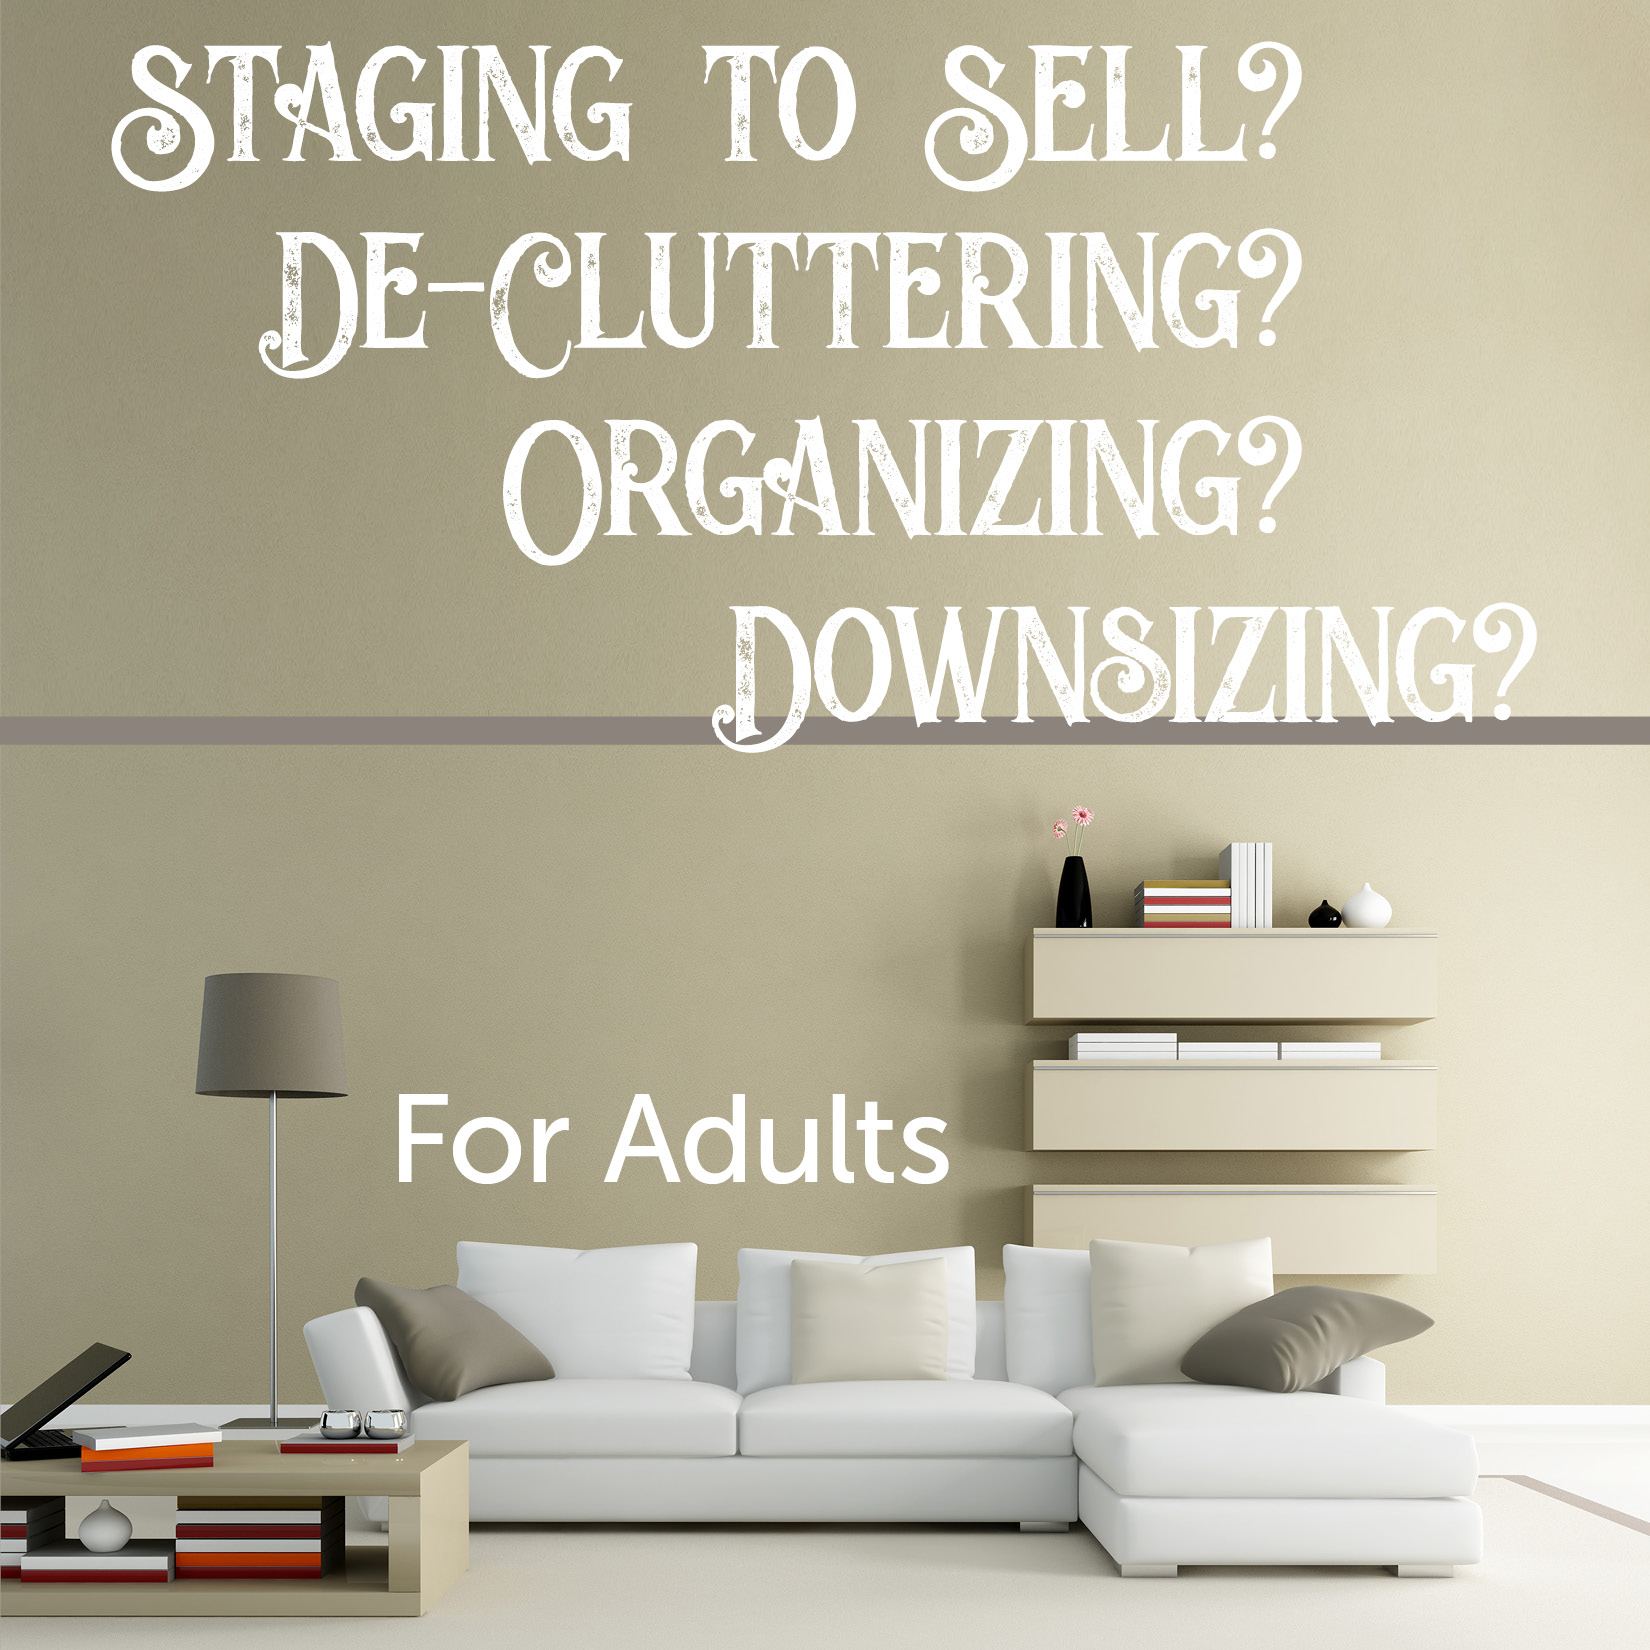 Staging to Sell? De-Cluttering? Organizing? Downsizing?